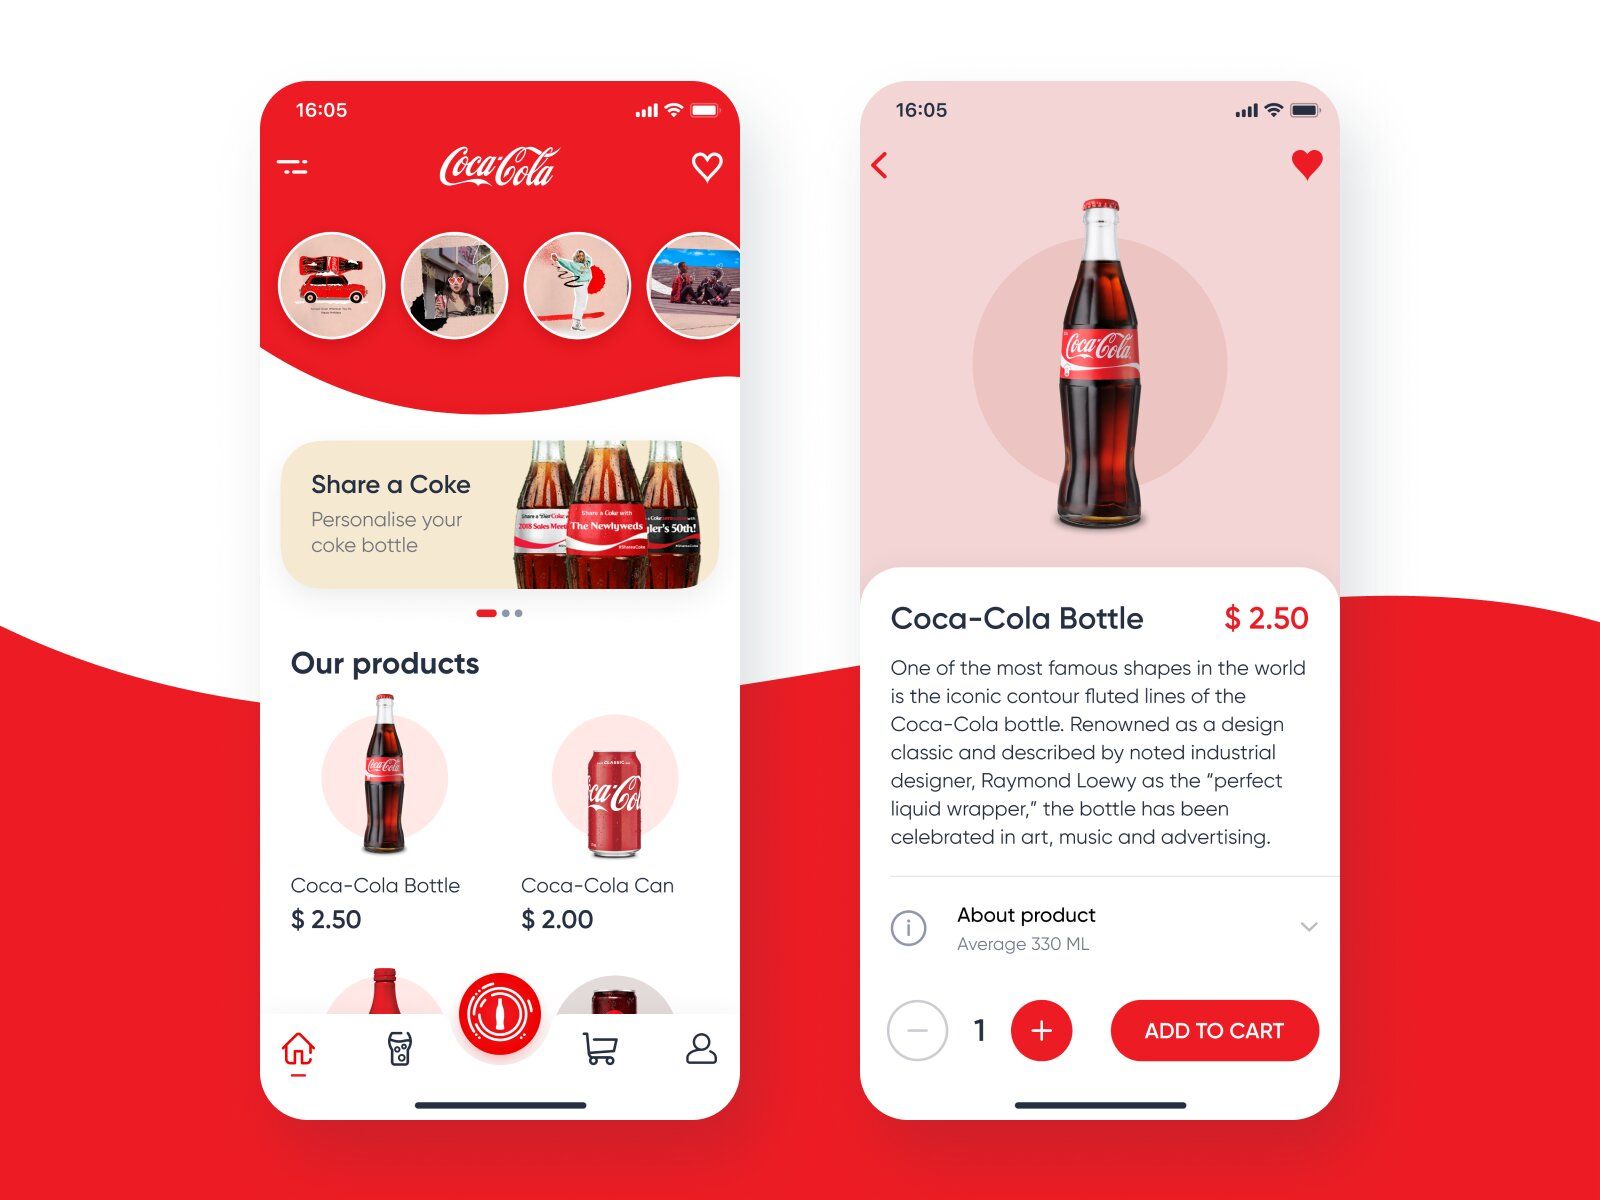 Coca-Cola (*image by [Tima King](https://dribbble.com/TimaKing){ rel="nofollow" target="_blank" .default-md}*)